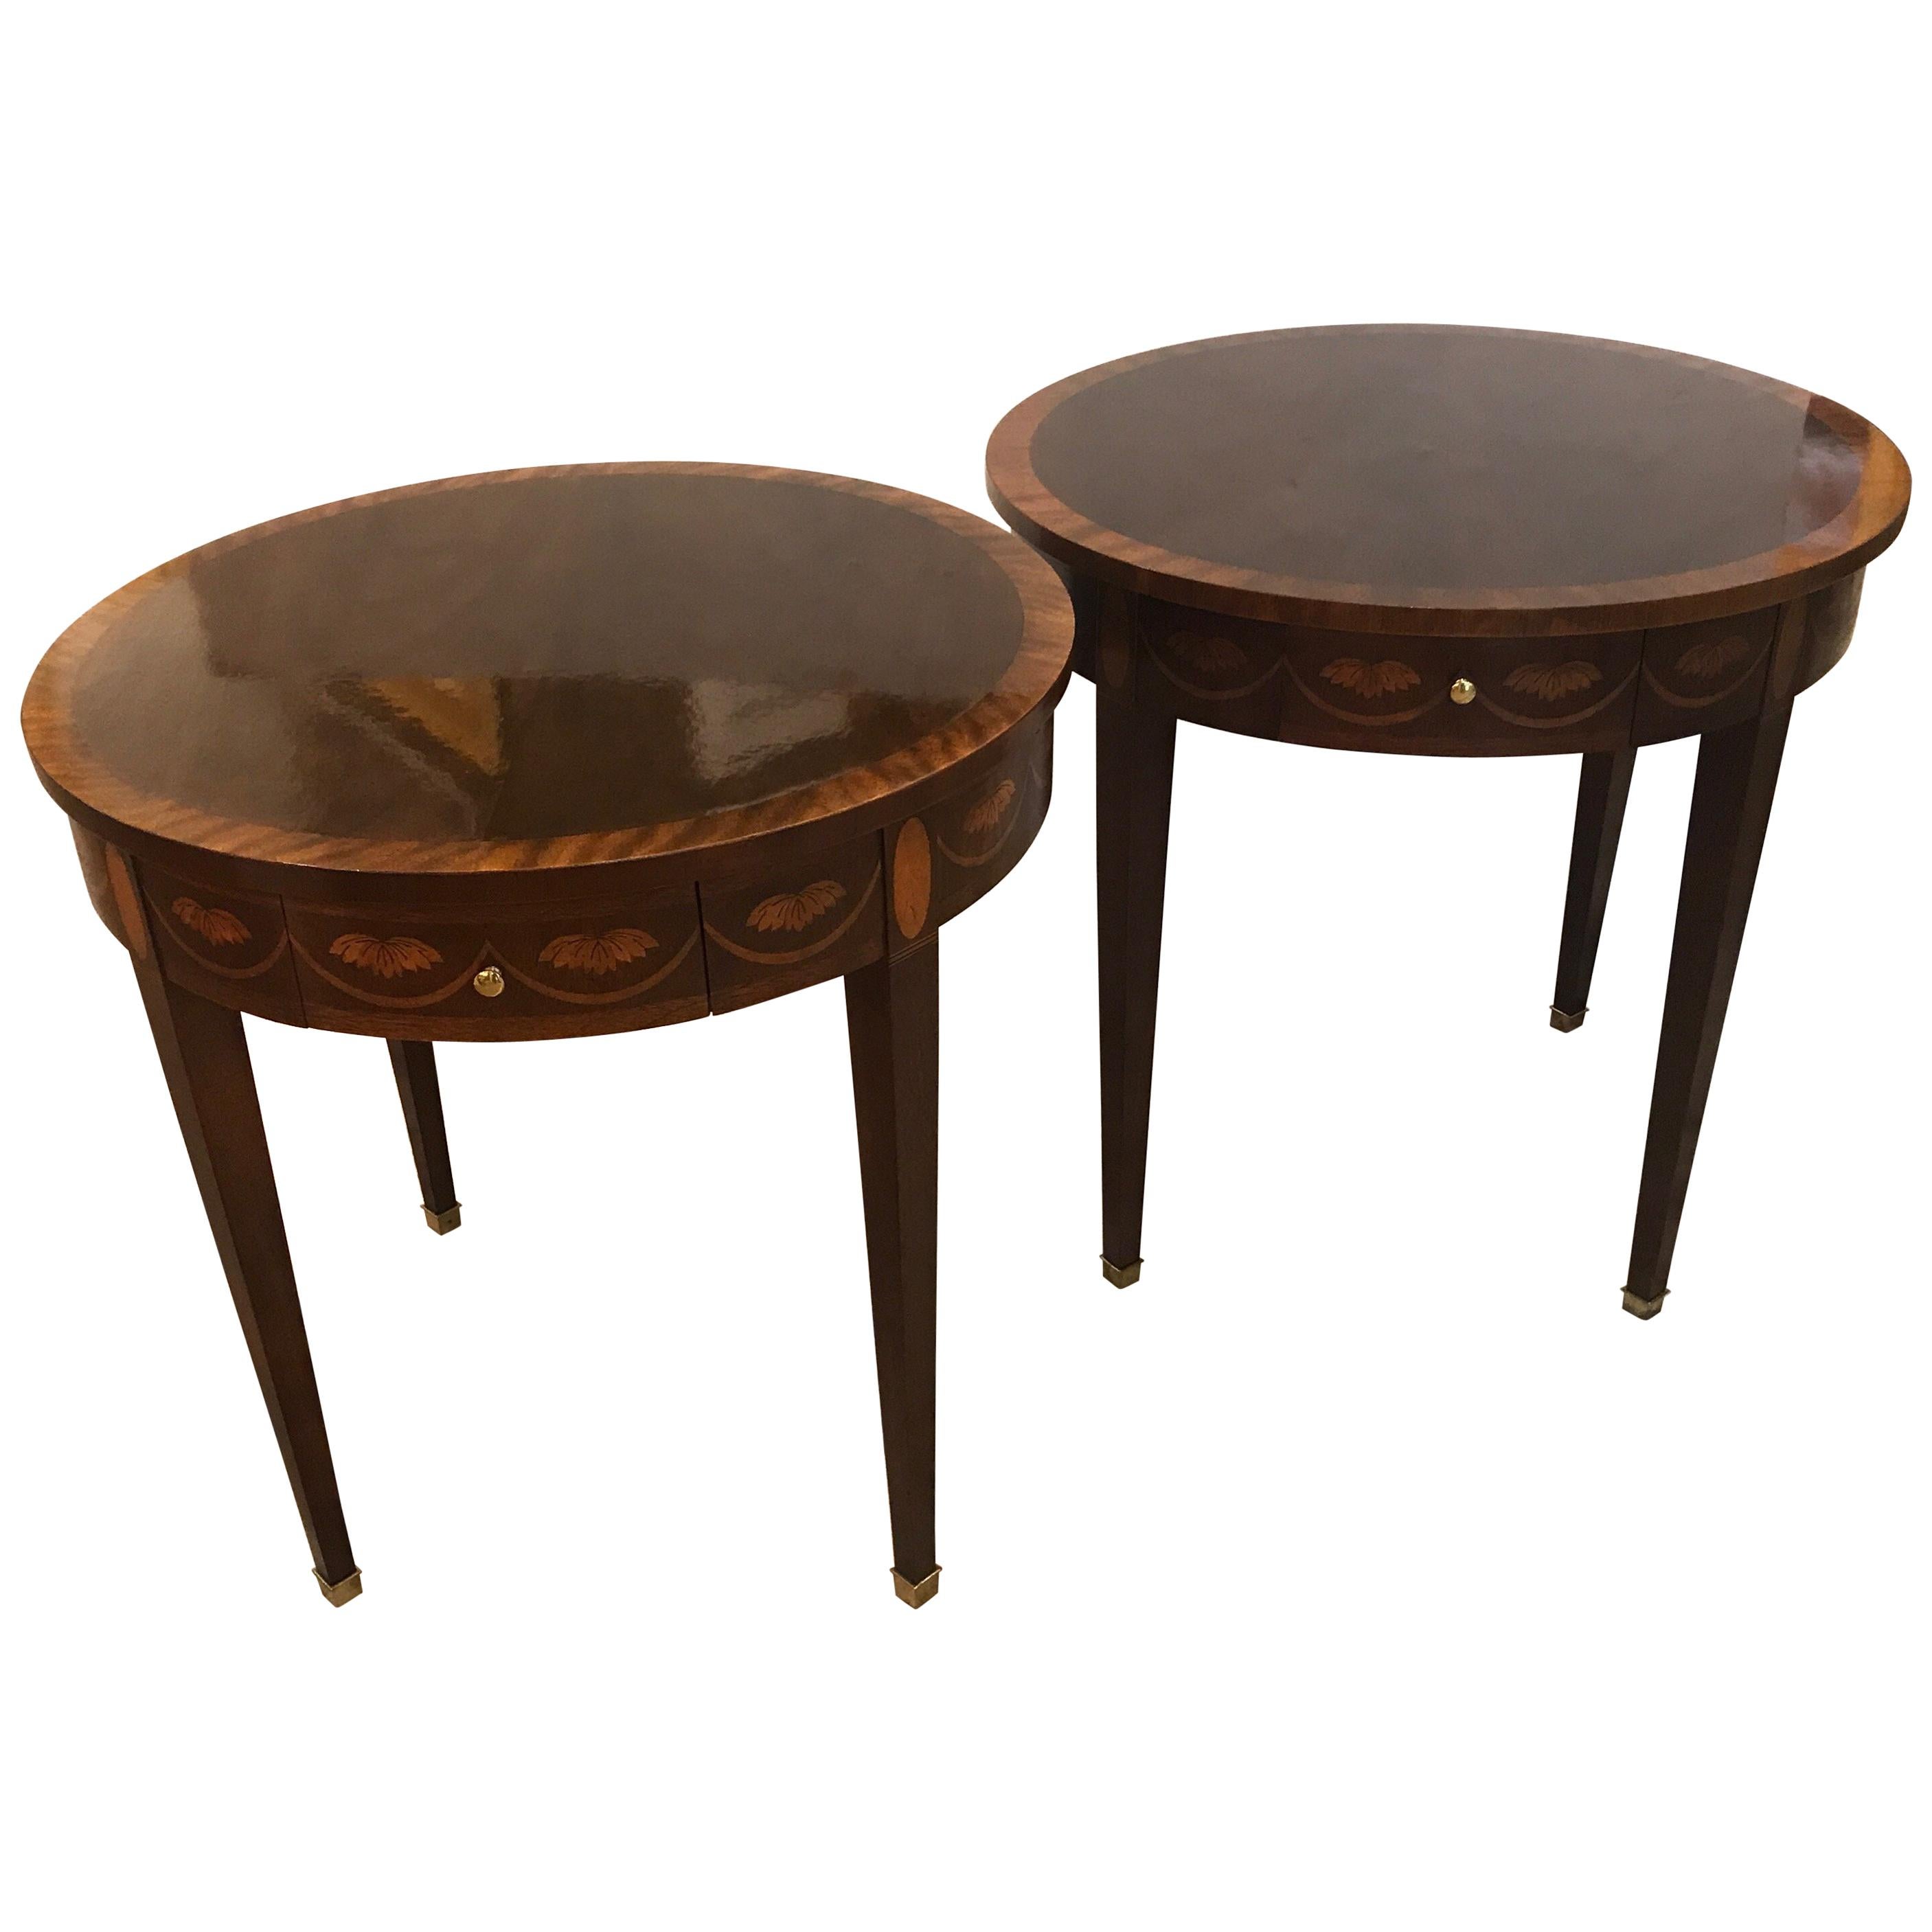 Pair of Round Flame Mahogany Inlaid Side Table by Baker Furniture